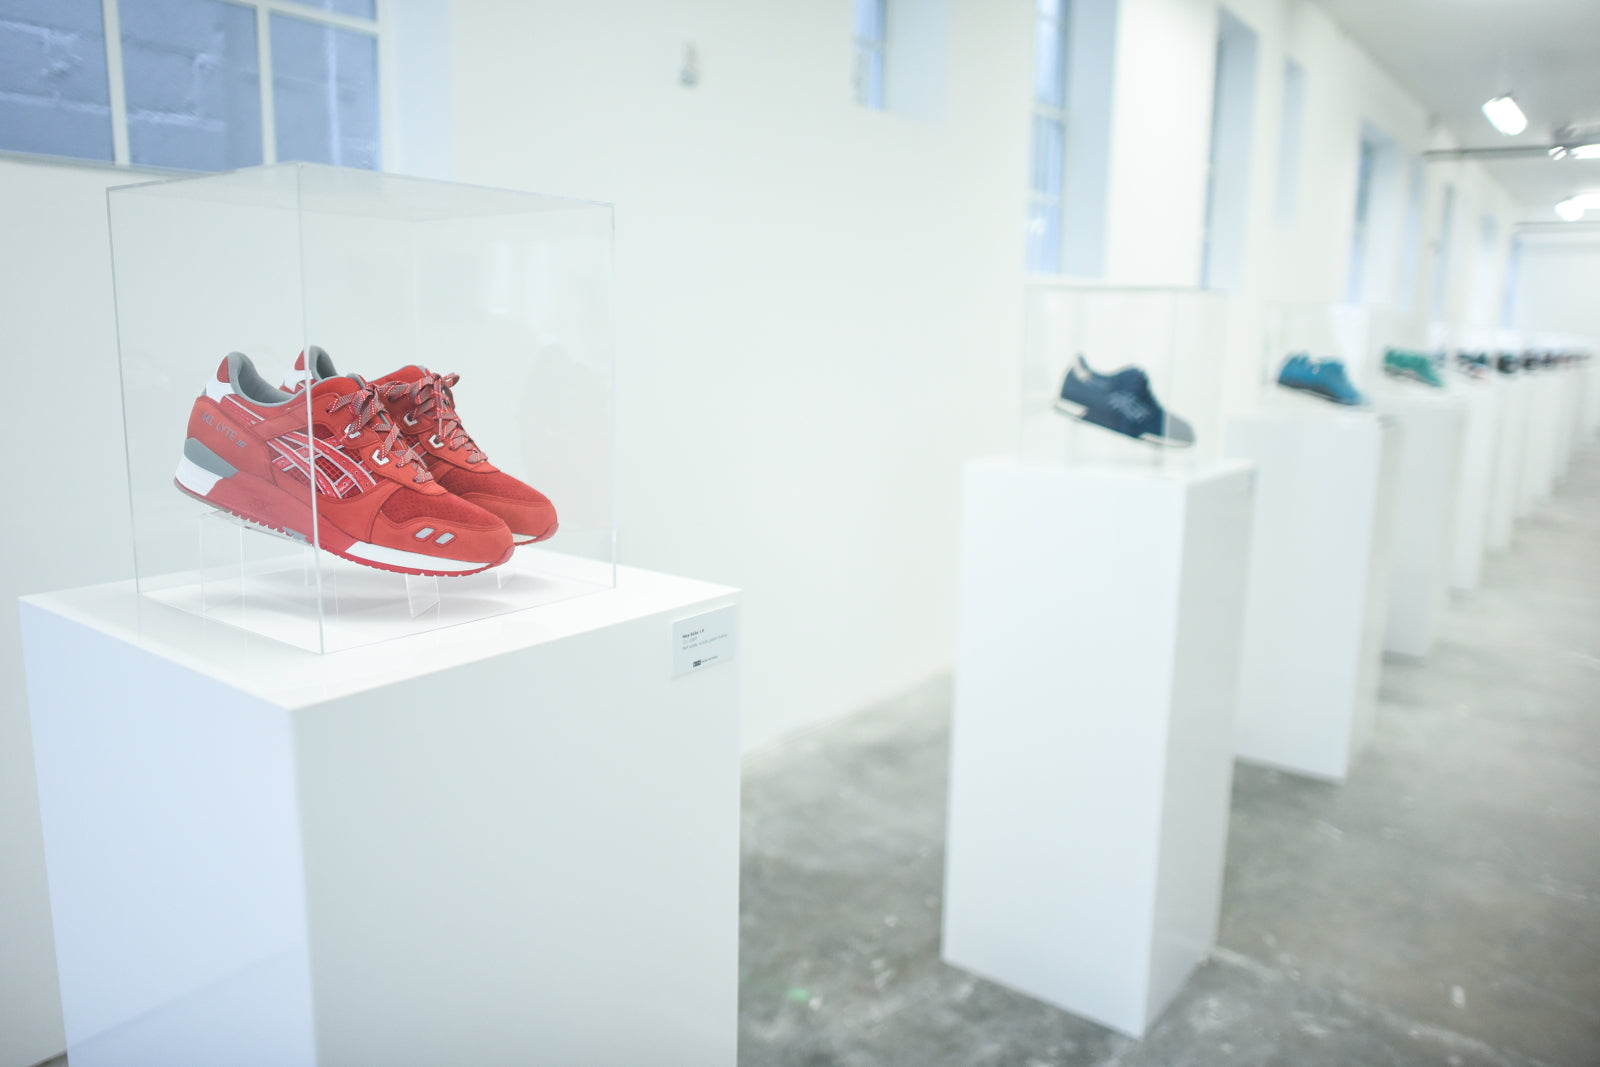 A Closer Look at the Kith Homage Exhibit